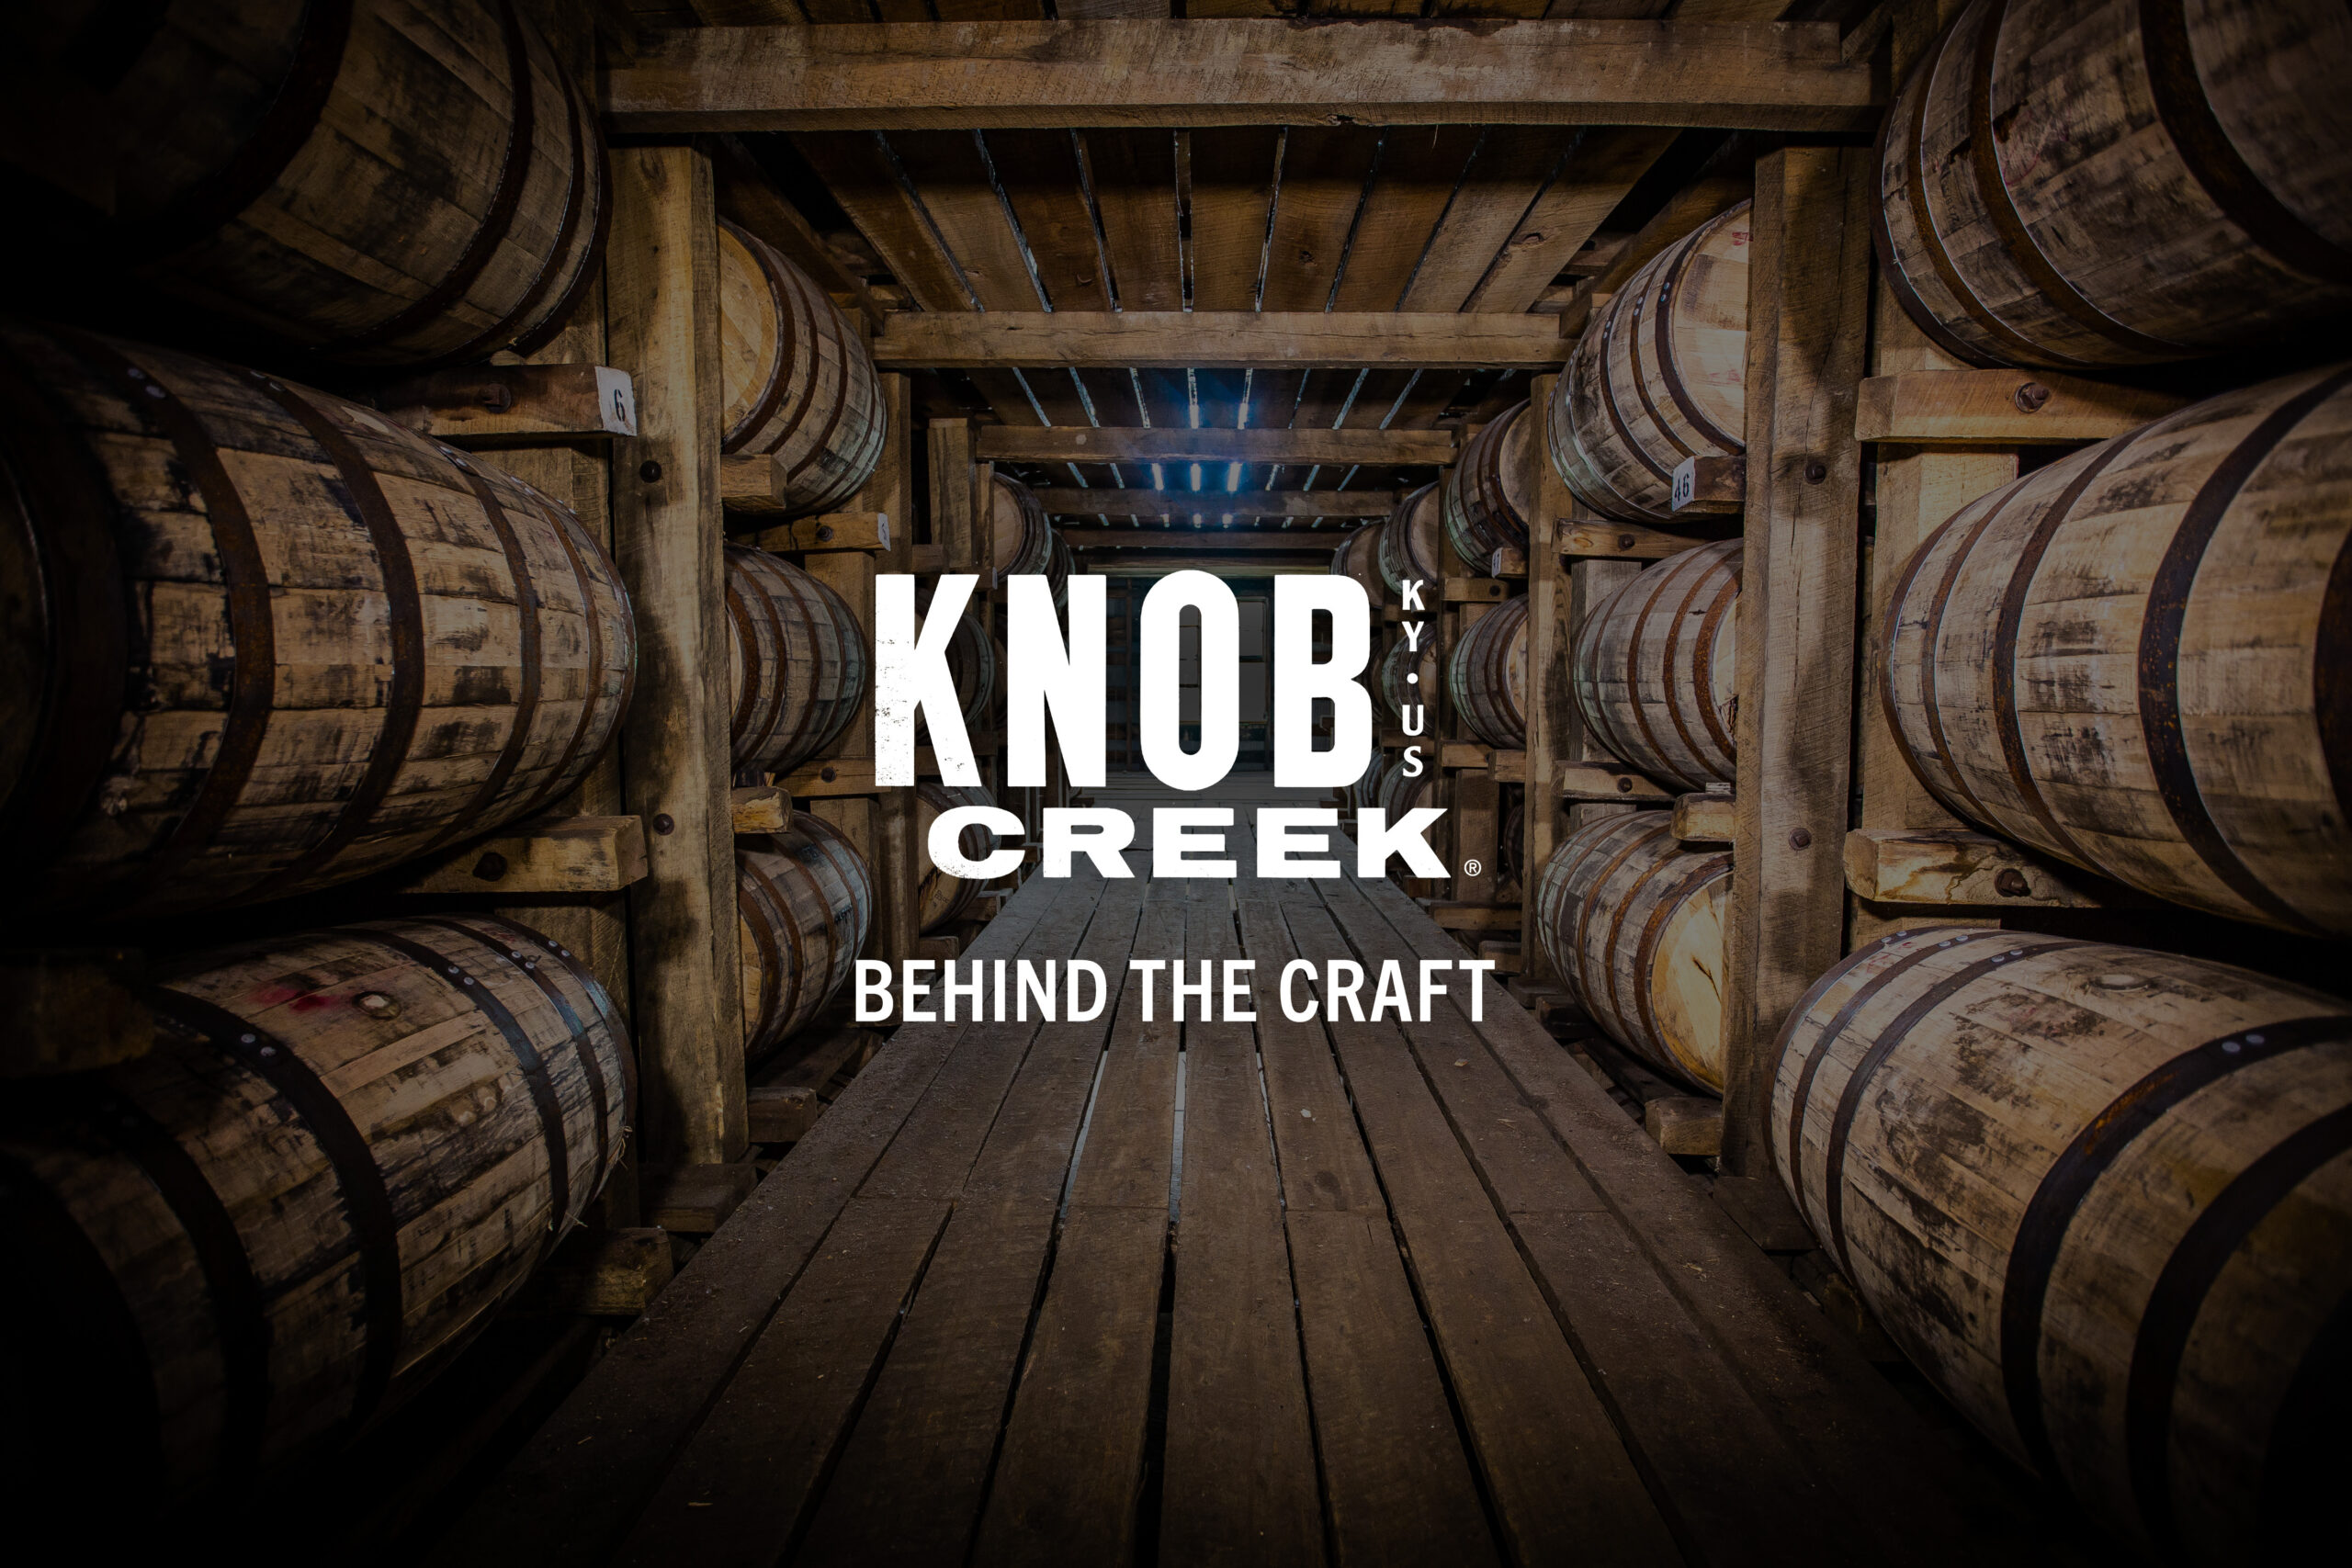 Best Bourbon Gift Ever? Knob Creek Offers an Amazing Experience